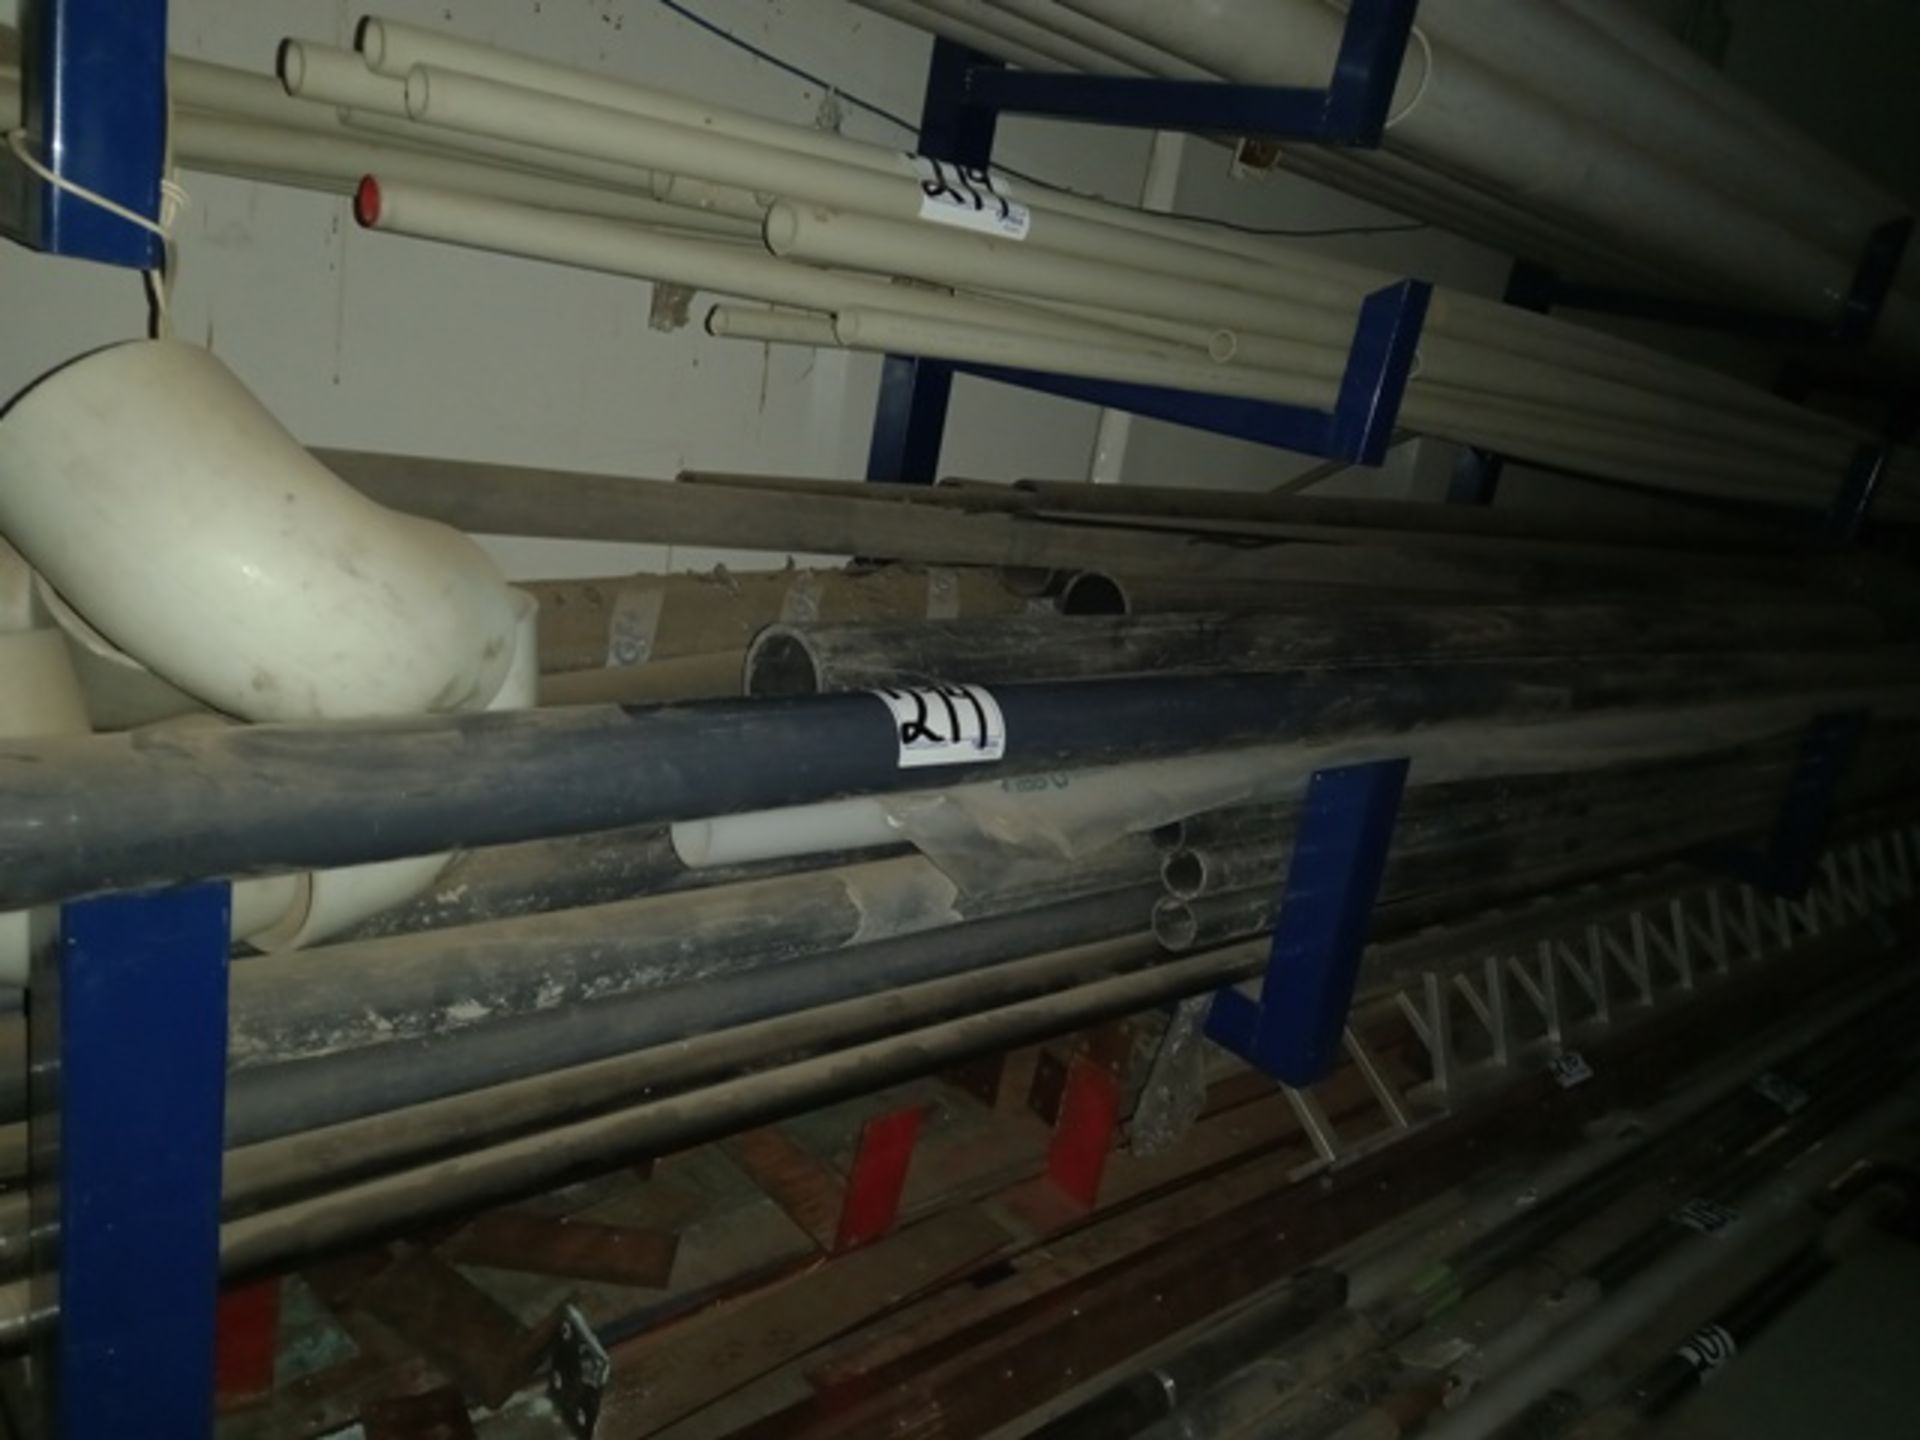 Lot of (1) Metallic Rack with Hydraulic PVC Pipe, Different Sizes (1" - 4") - Image 5 of 7